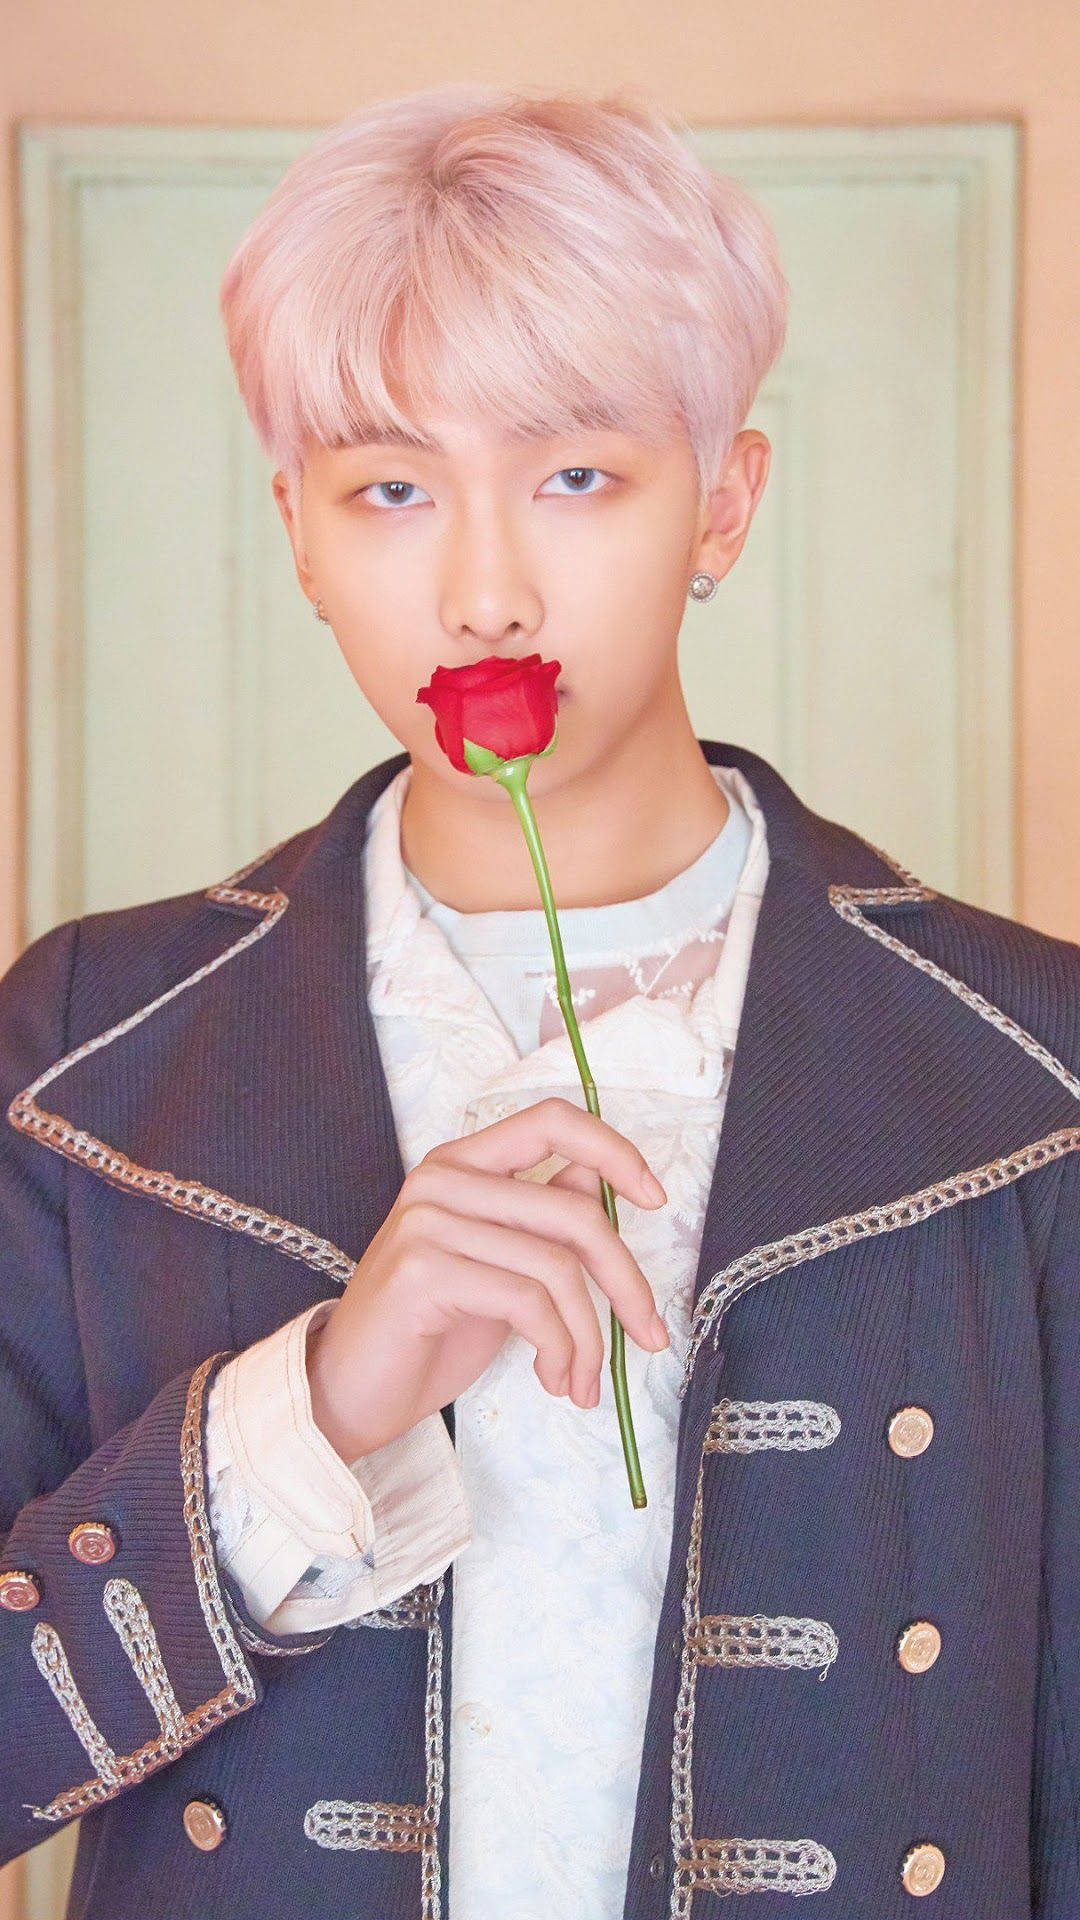 Cute Bts Rm With Rose Wallpaper